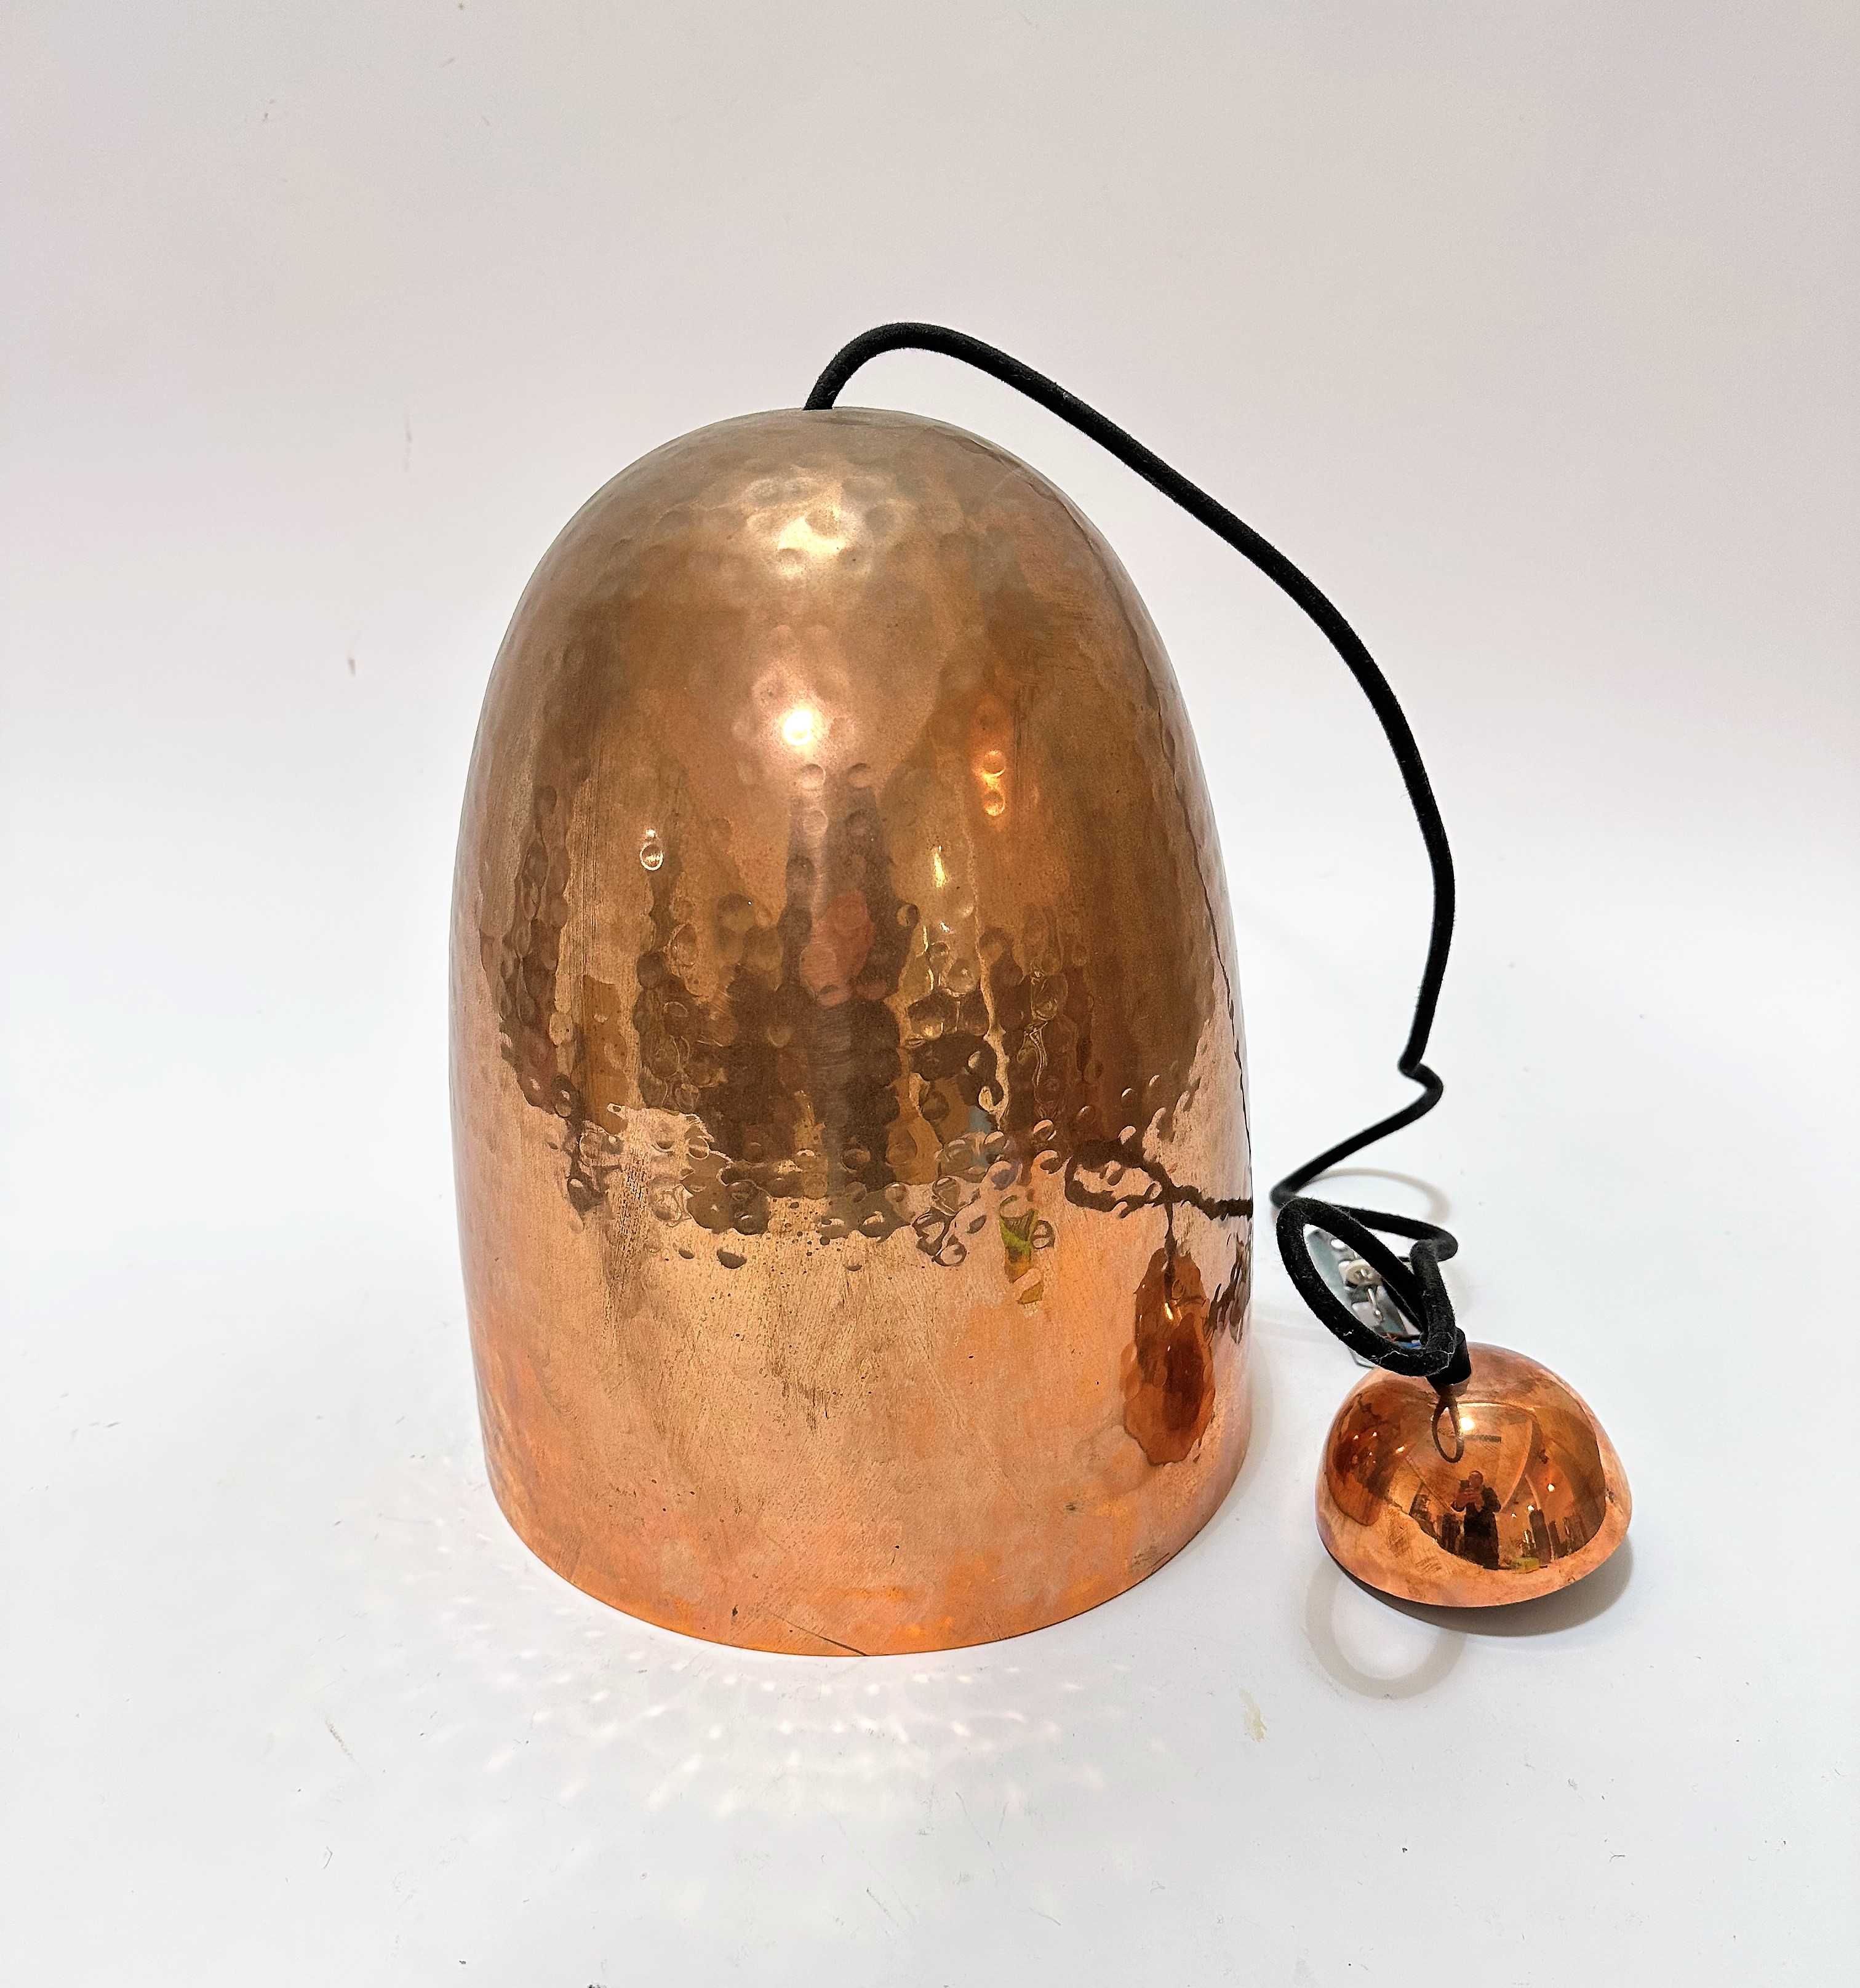 A modern hammered copper tapered dome shaped light fitting complete with cable and fixing, (33cm x